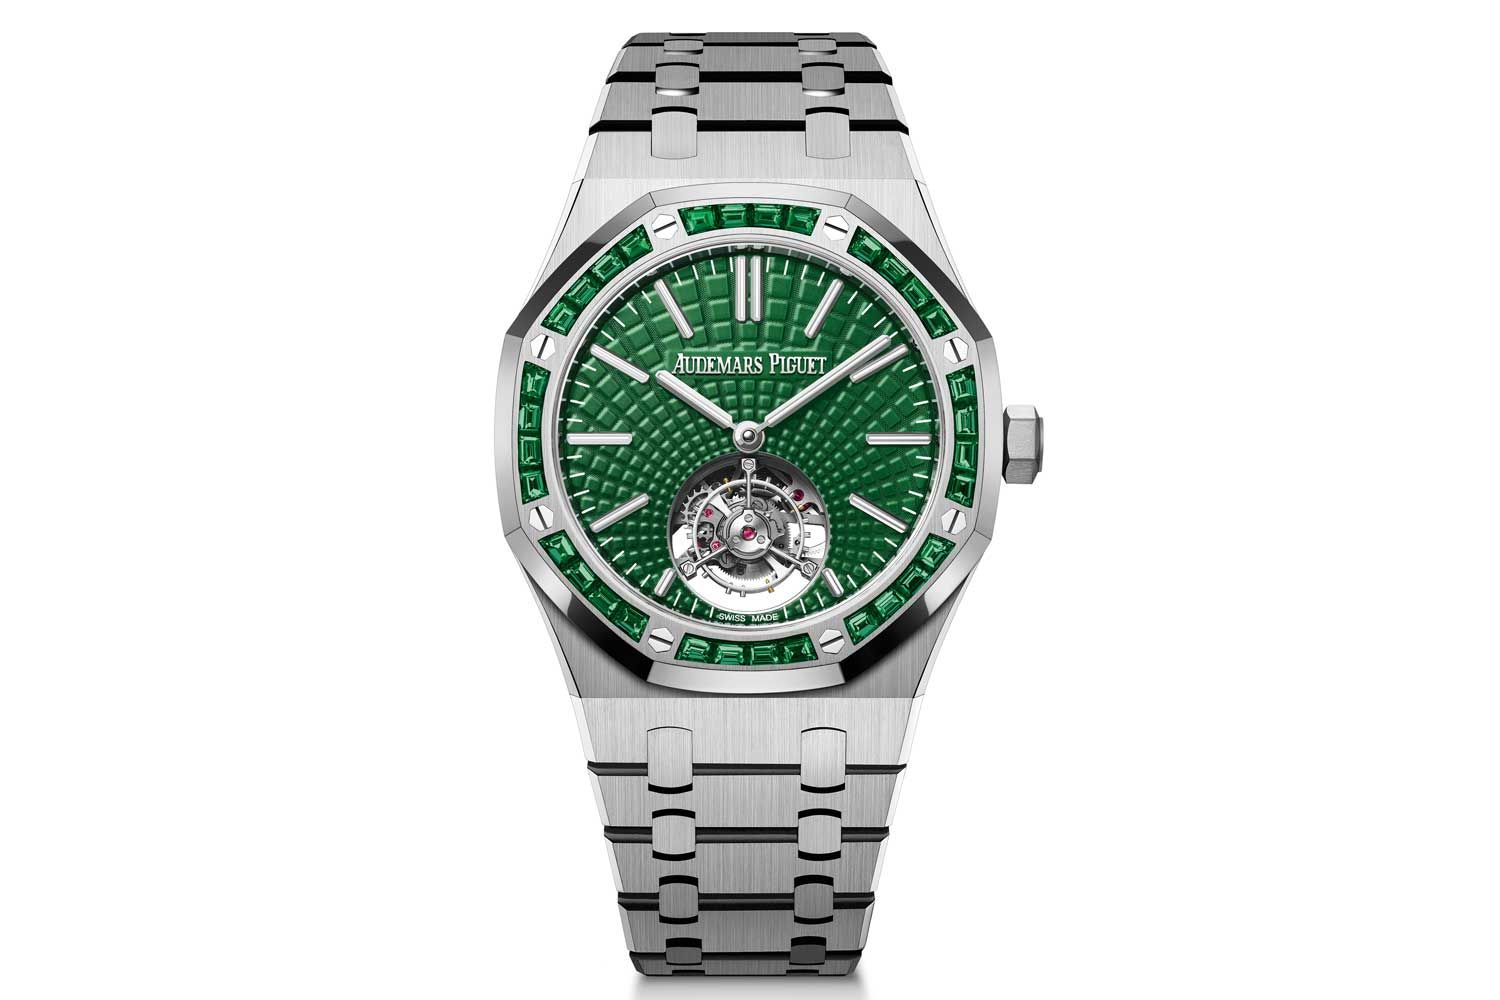 Royal Oak Tourbillon Extra-Thin ref. 26532IC which combines a titanium case and a white gold bezel set with baguette-cut emeralds with an emerald green dial